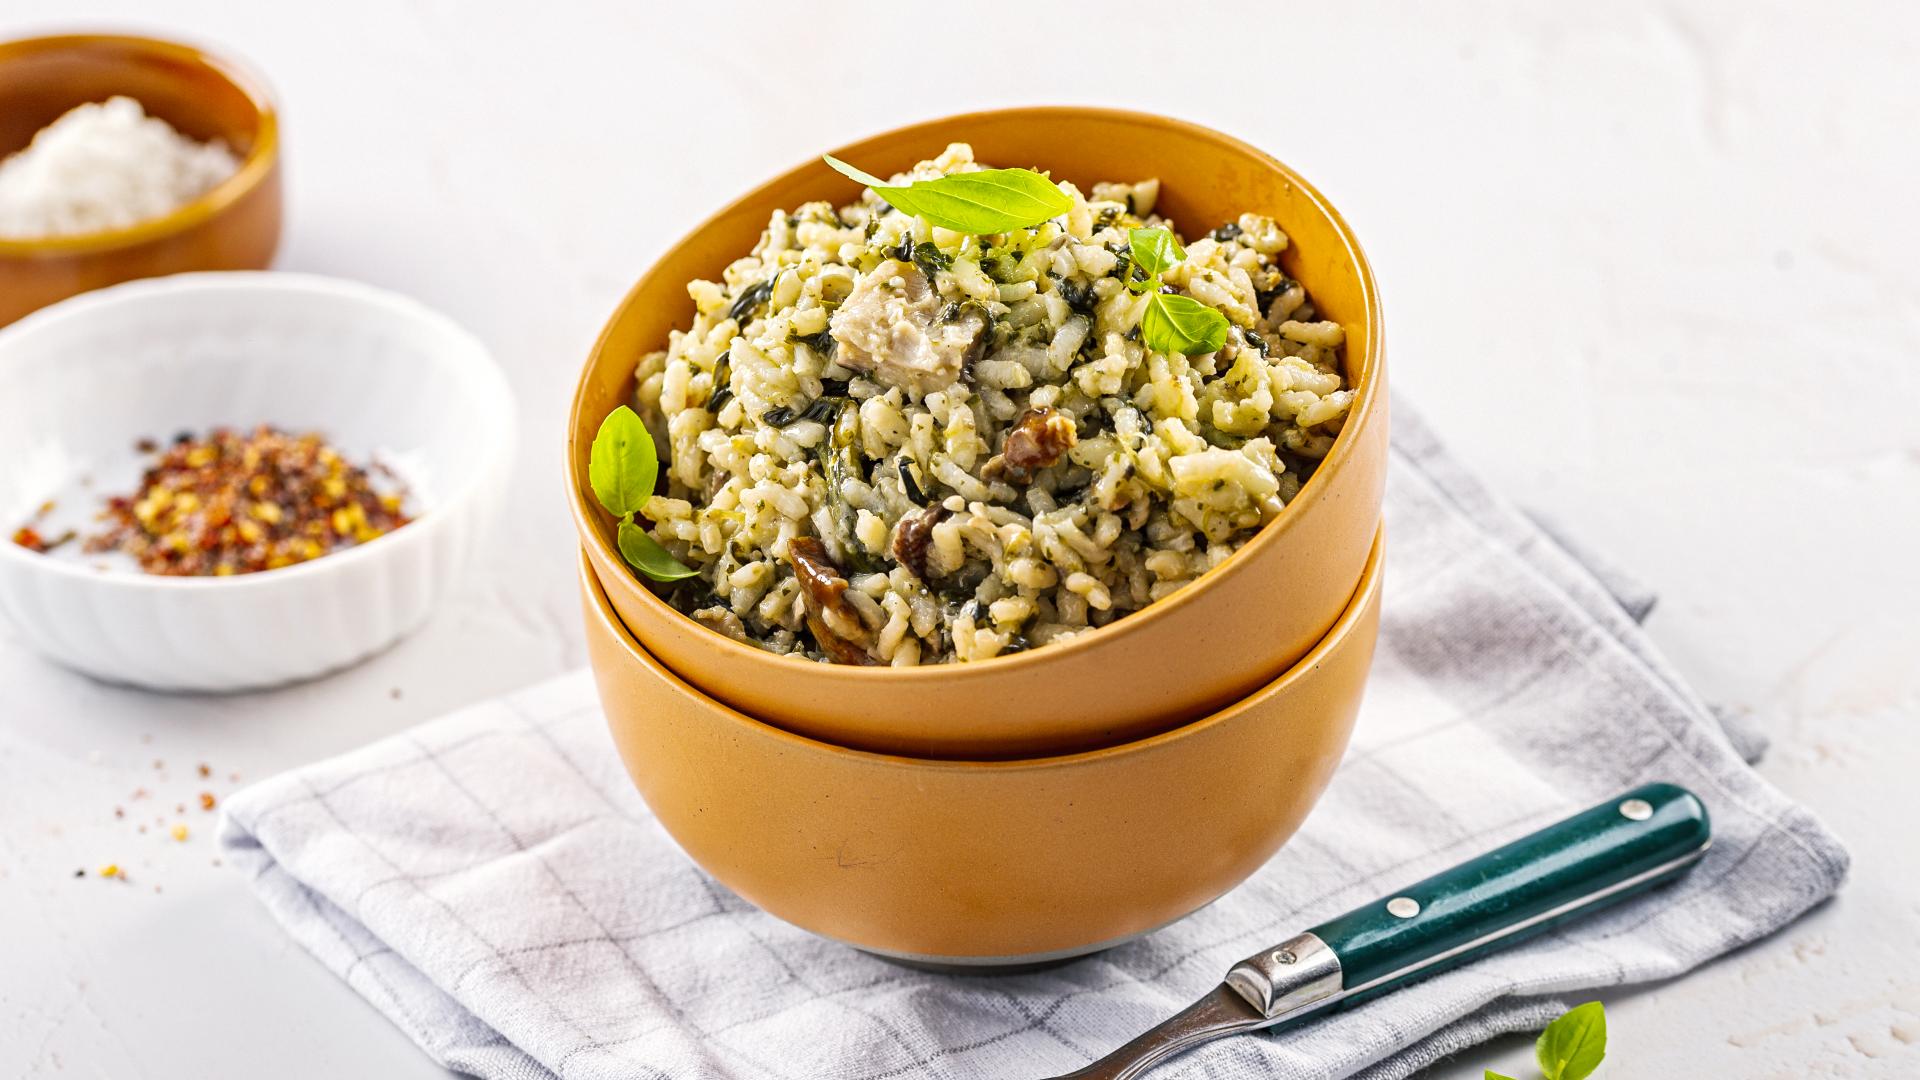 Green Risotto with Mushrooms 2